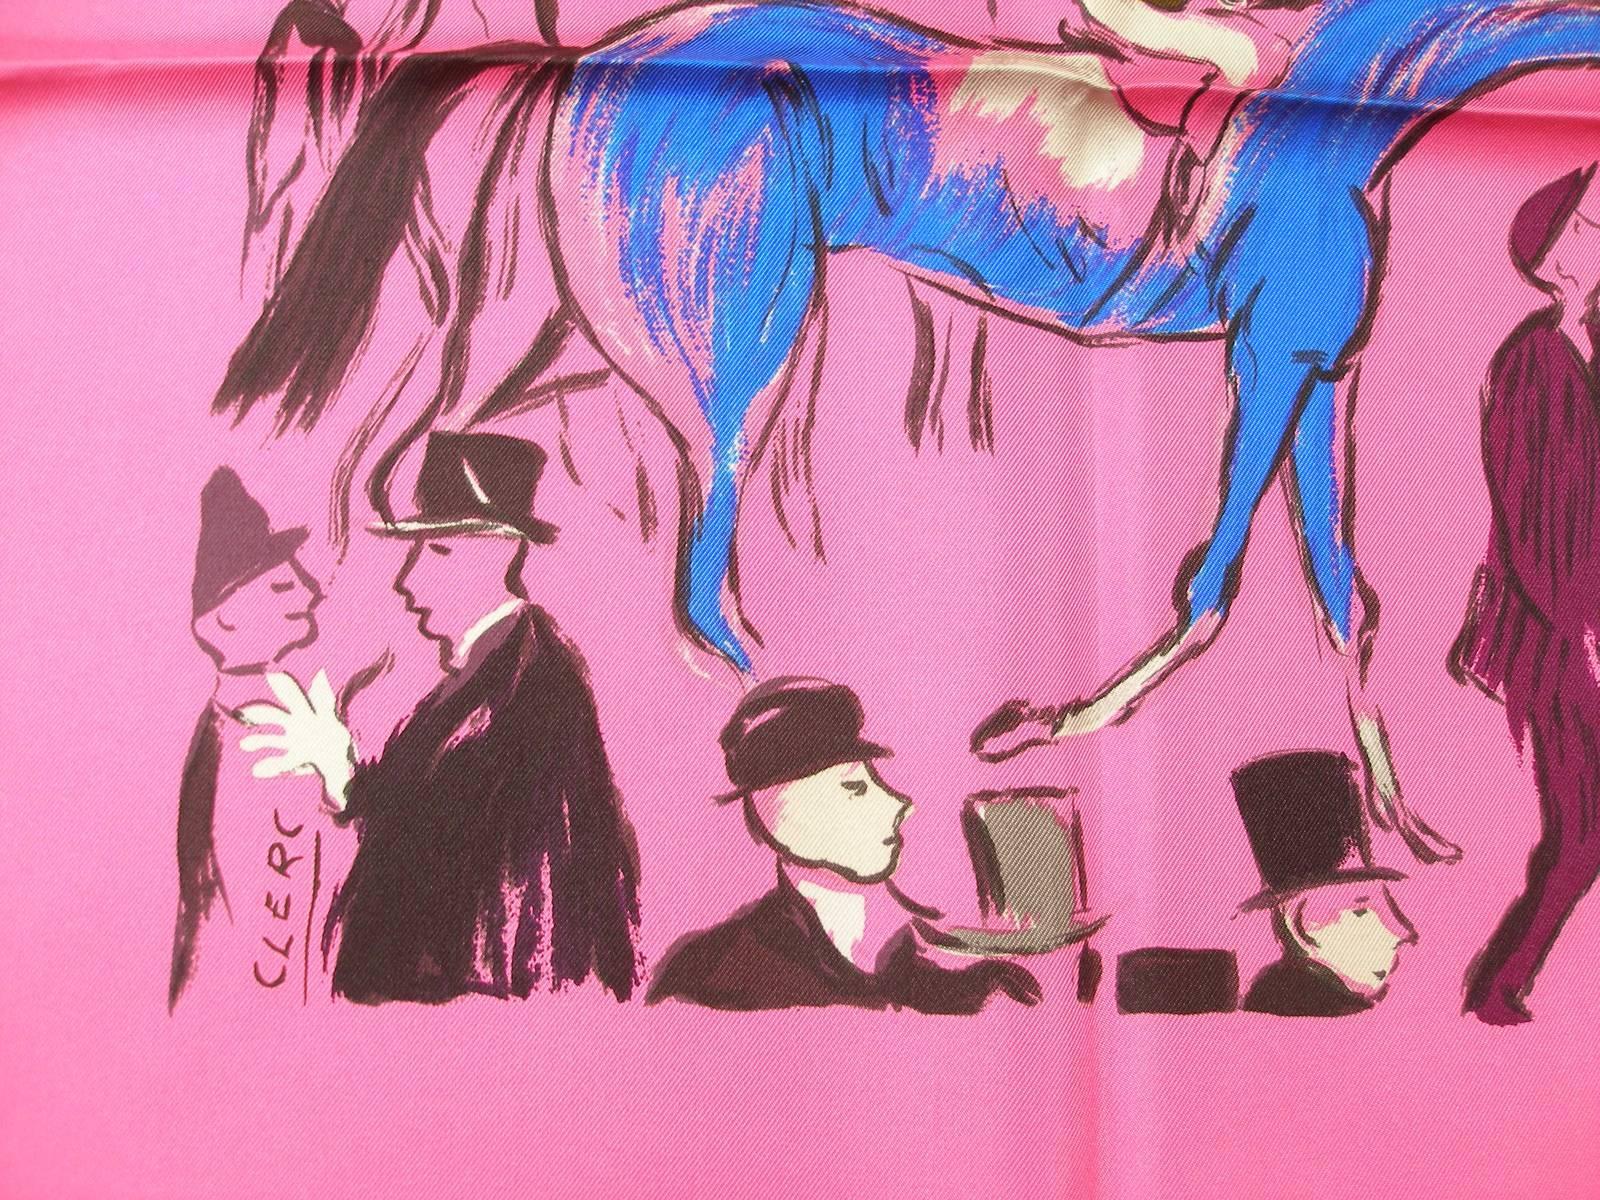 MAGNIFIC
Hermès scarf Paddock Model
Design by Jean-Louis Clerc 
First édition 1955 
Reprinted in 2004 and 2015, which attests to its success. 
Tags and copyright are intacts 
Édition 2015 
Dimensions : 90 x 90 cm 
100 % twill silk
Sorry no box , its